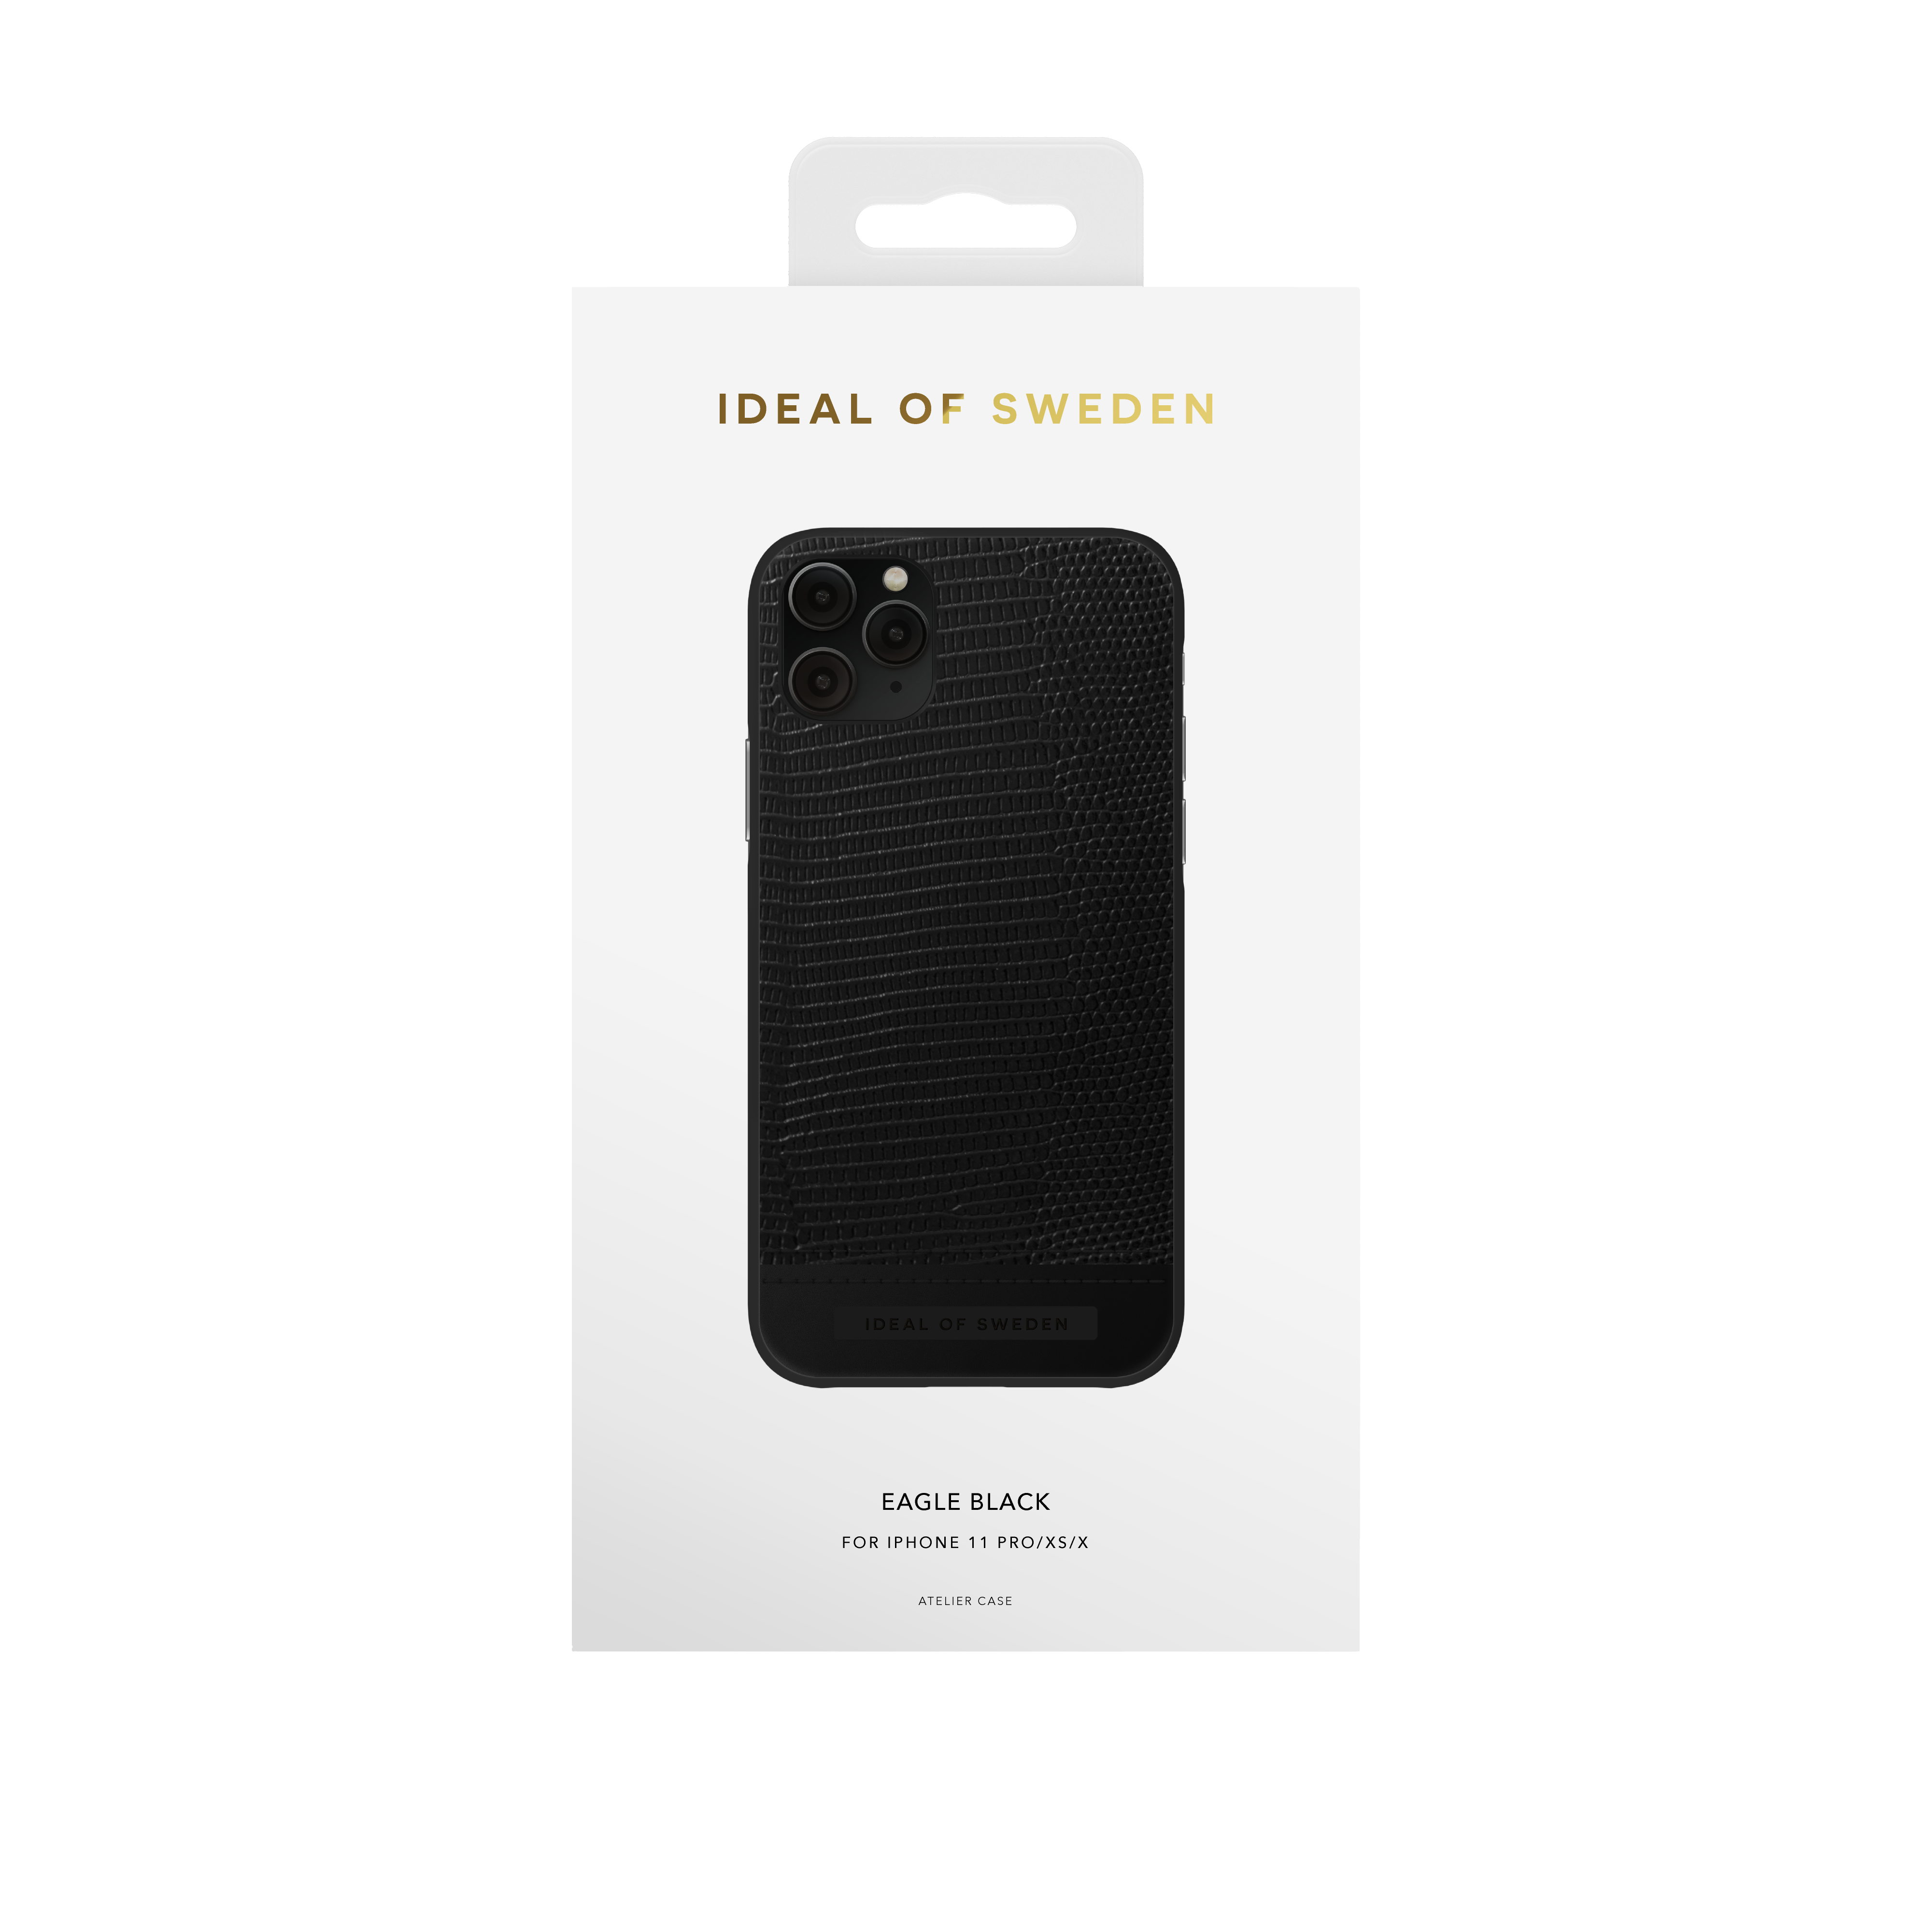 IDEAL OF SWEDEN IDACAW20-1958-229, Backcover, Pro, Eagle iPhone Apple, iPhone Black 11 XS, X, iPhone